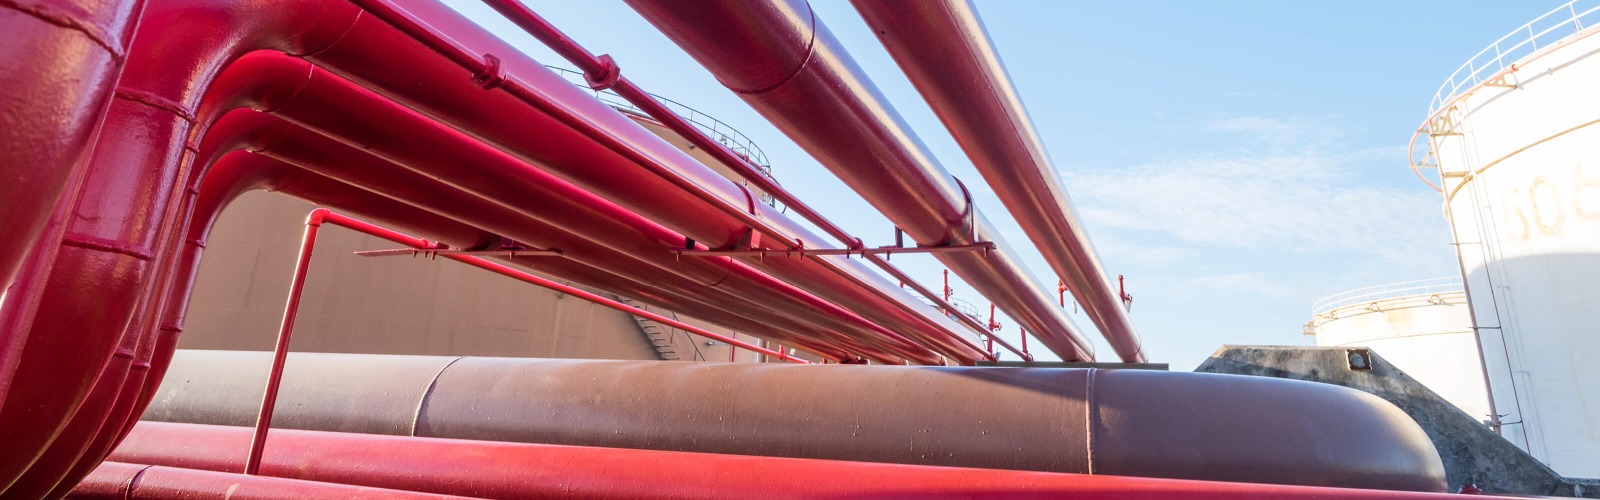 Red industrial pipes